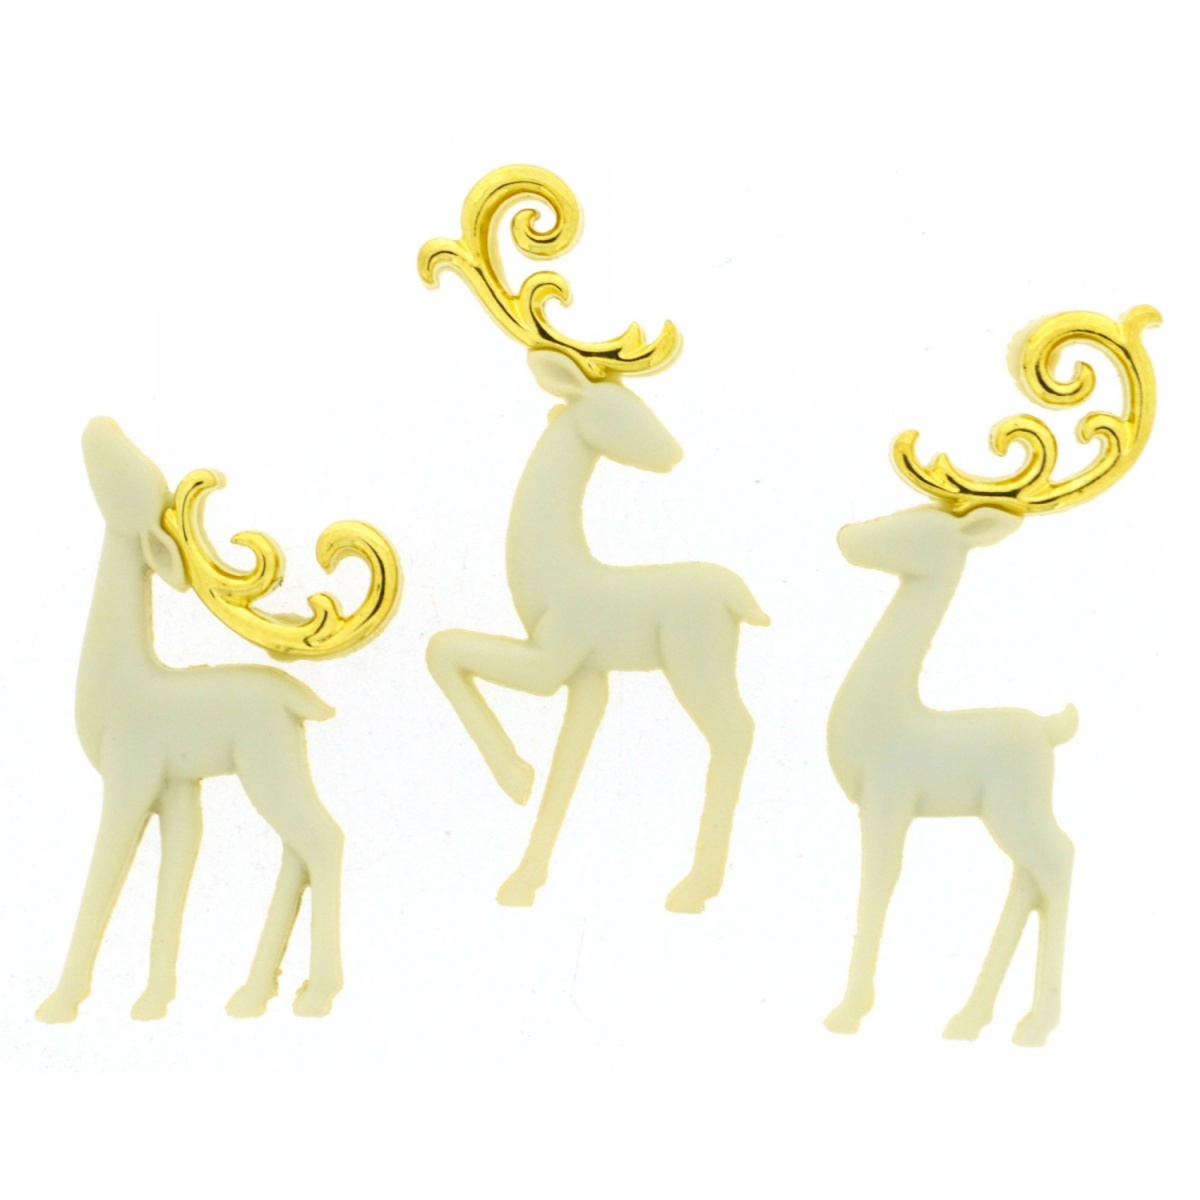 Majestic Reindeer Set of Decorative Buttons фото 1